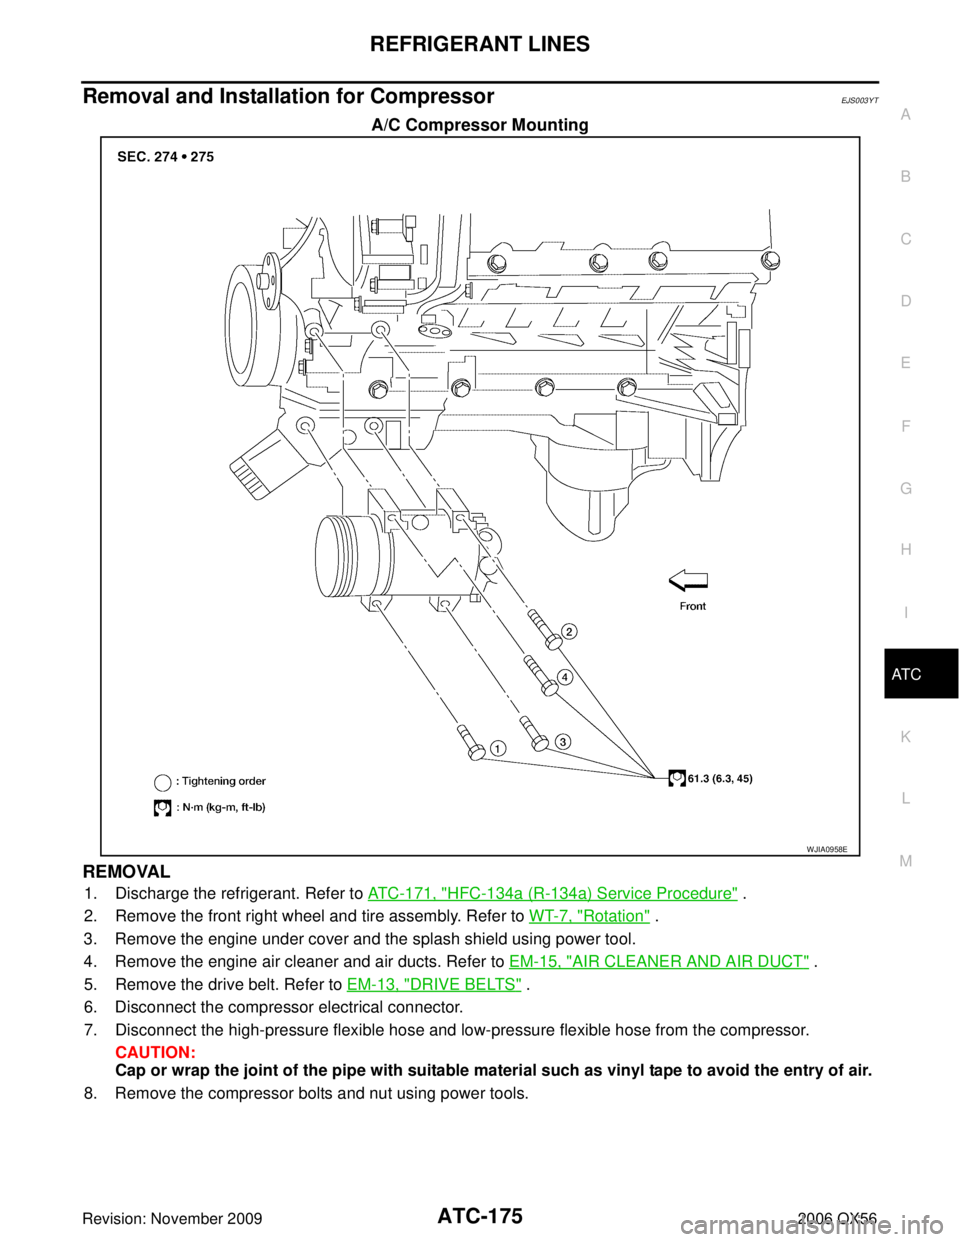 INFINITI QX56 2006  Factory Service Manual REFRIGERANT LINESATC-175
C
DE
F
G H
I
K L
M A
B
AT C
Revision: November 2009 2006 QX56
Removal and Installation for CompressorEJS003YT
A/C Compressor Mounting
REMOVAL
1. Discharge the refrigerant. Ref